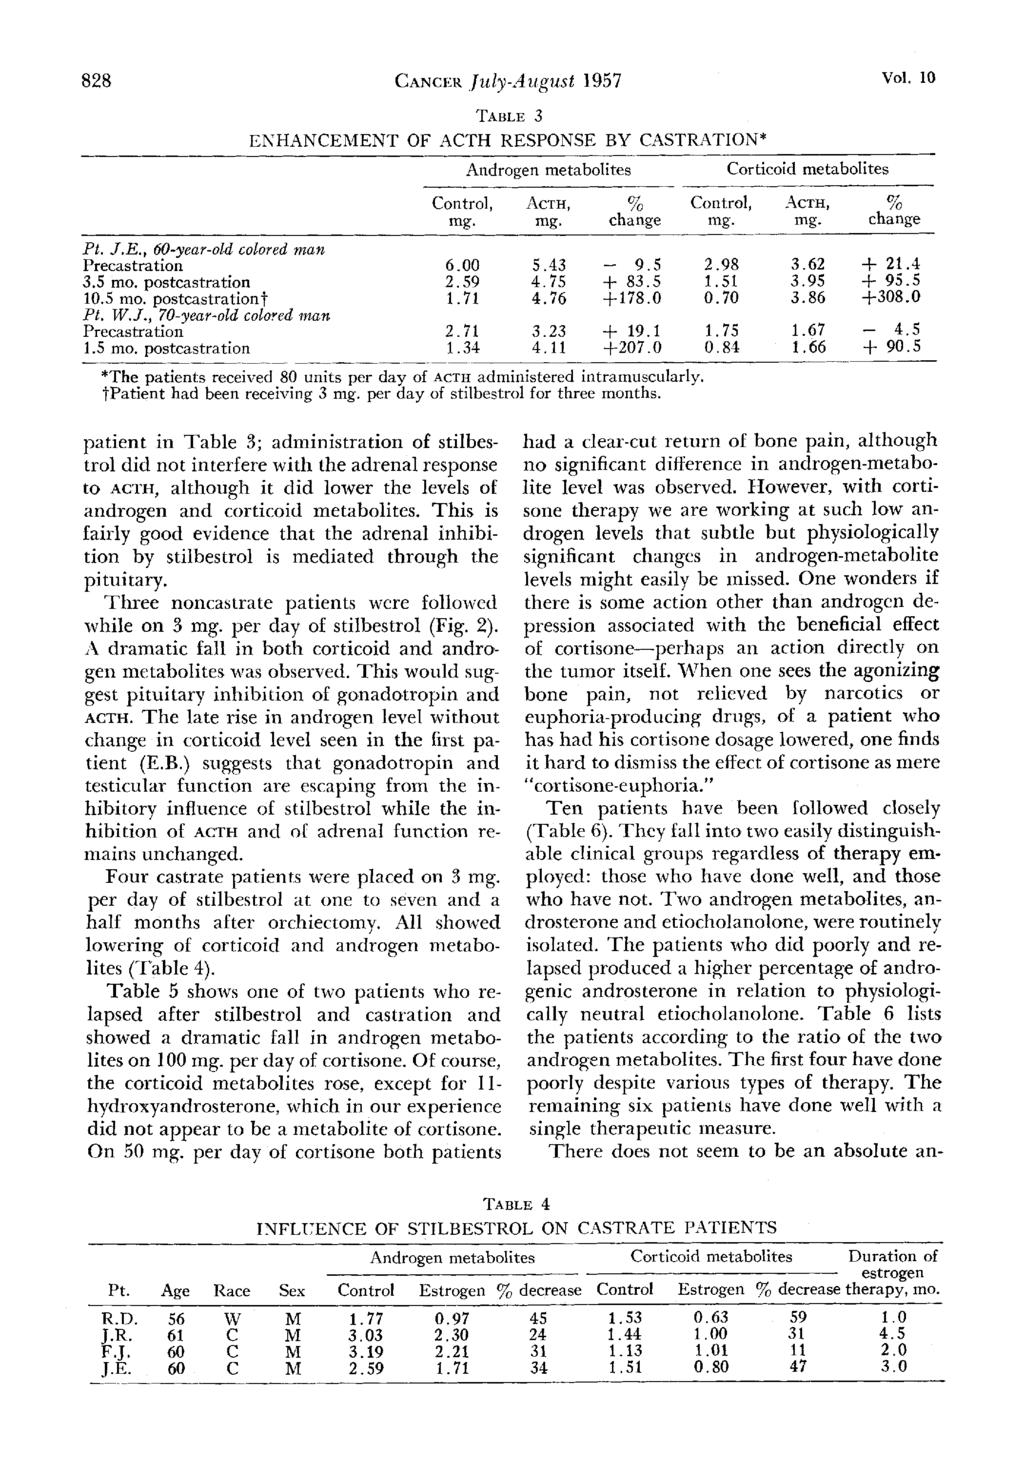 - 828 CANCEK July-August 1957 Vol. 1 TABLE 3 ENHANCEMENT OF ACTH RESPONSE BY CASTRATION* Androgen metabolites Corticoid metabolites - Control, ACTH, % Control,.~CTH, % mg. mg. change mg. mg. change - Pt.